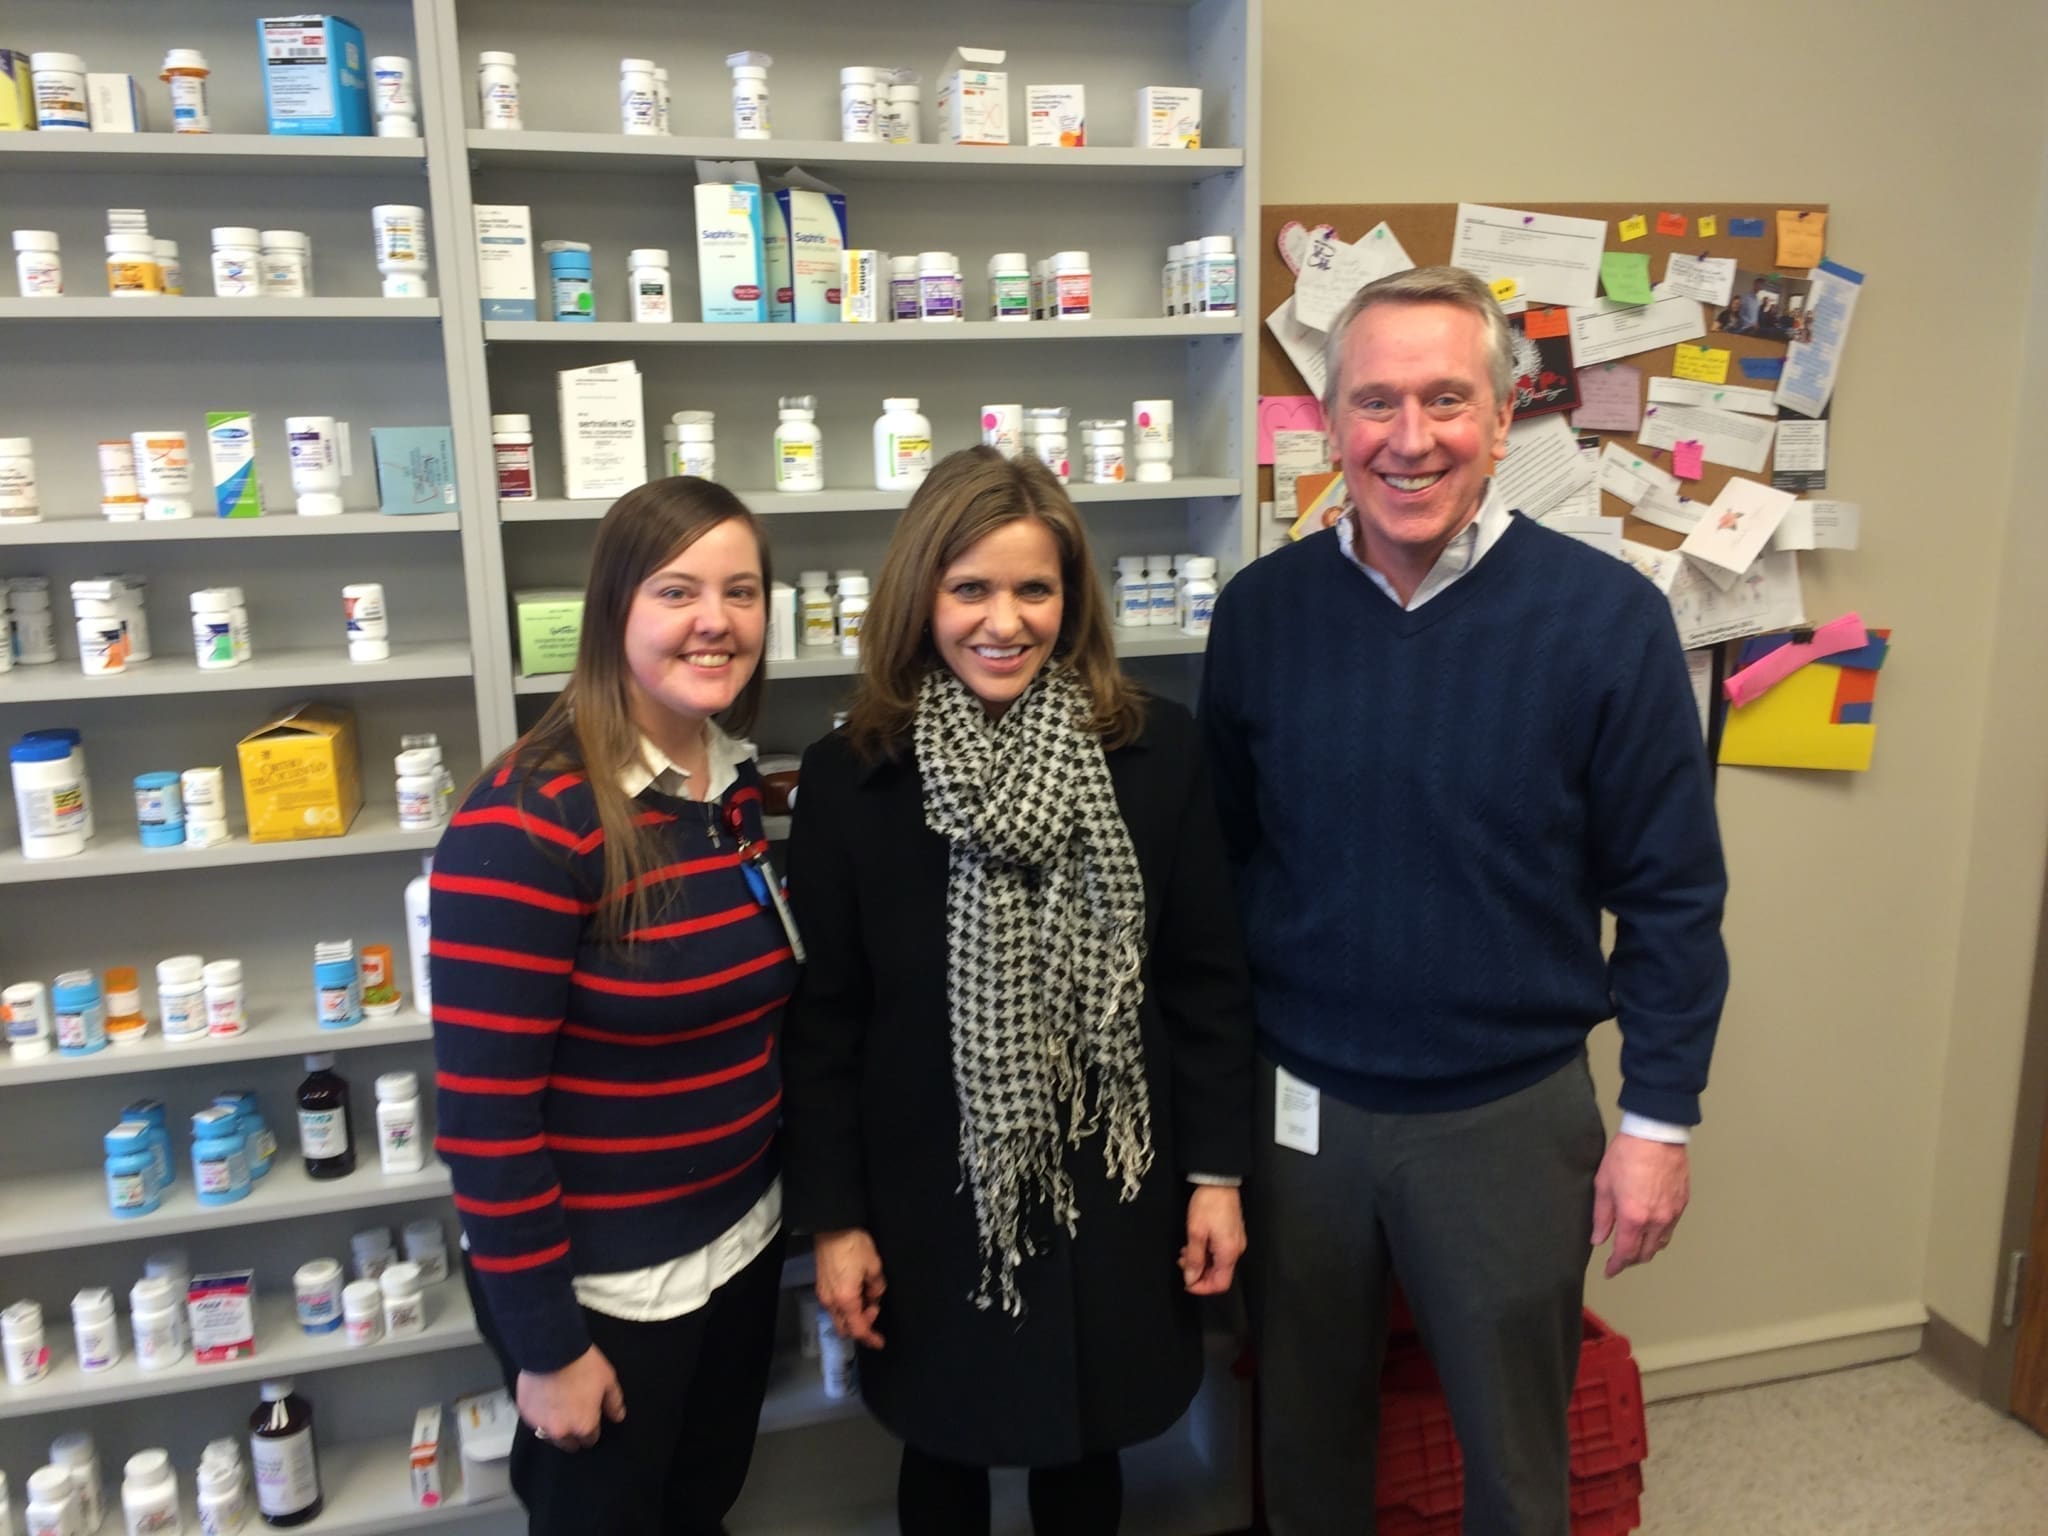 Rep. Lynn Jenkins (R-KS) of the House Ways & Means Health Subcommittee participated in an NACDS RxIMPACT pharmacy tour this week at a Genoa in Topeka, Kan.